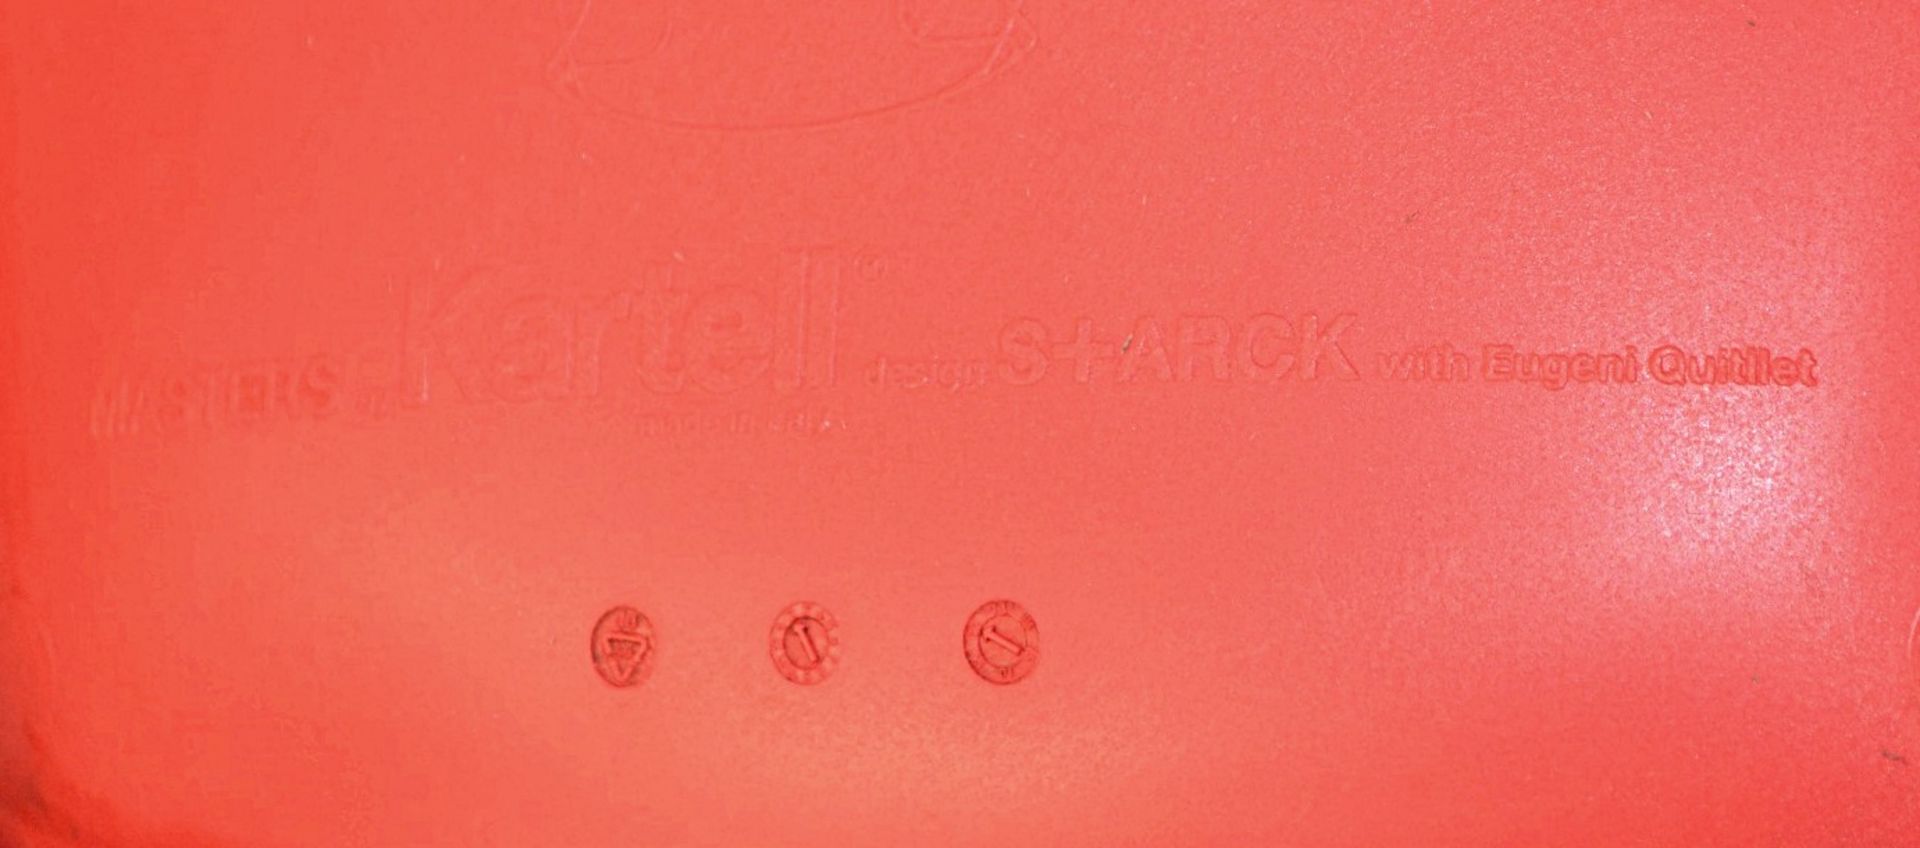 10 x Philippe Starck For Kartell 'Masters' Designer Red Gloss Bistro Chairs - Made In Italy - Used - Image 4 of 9